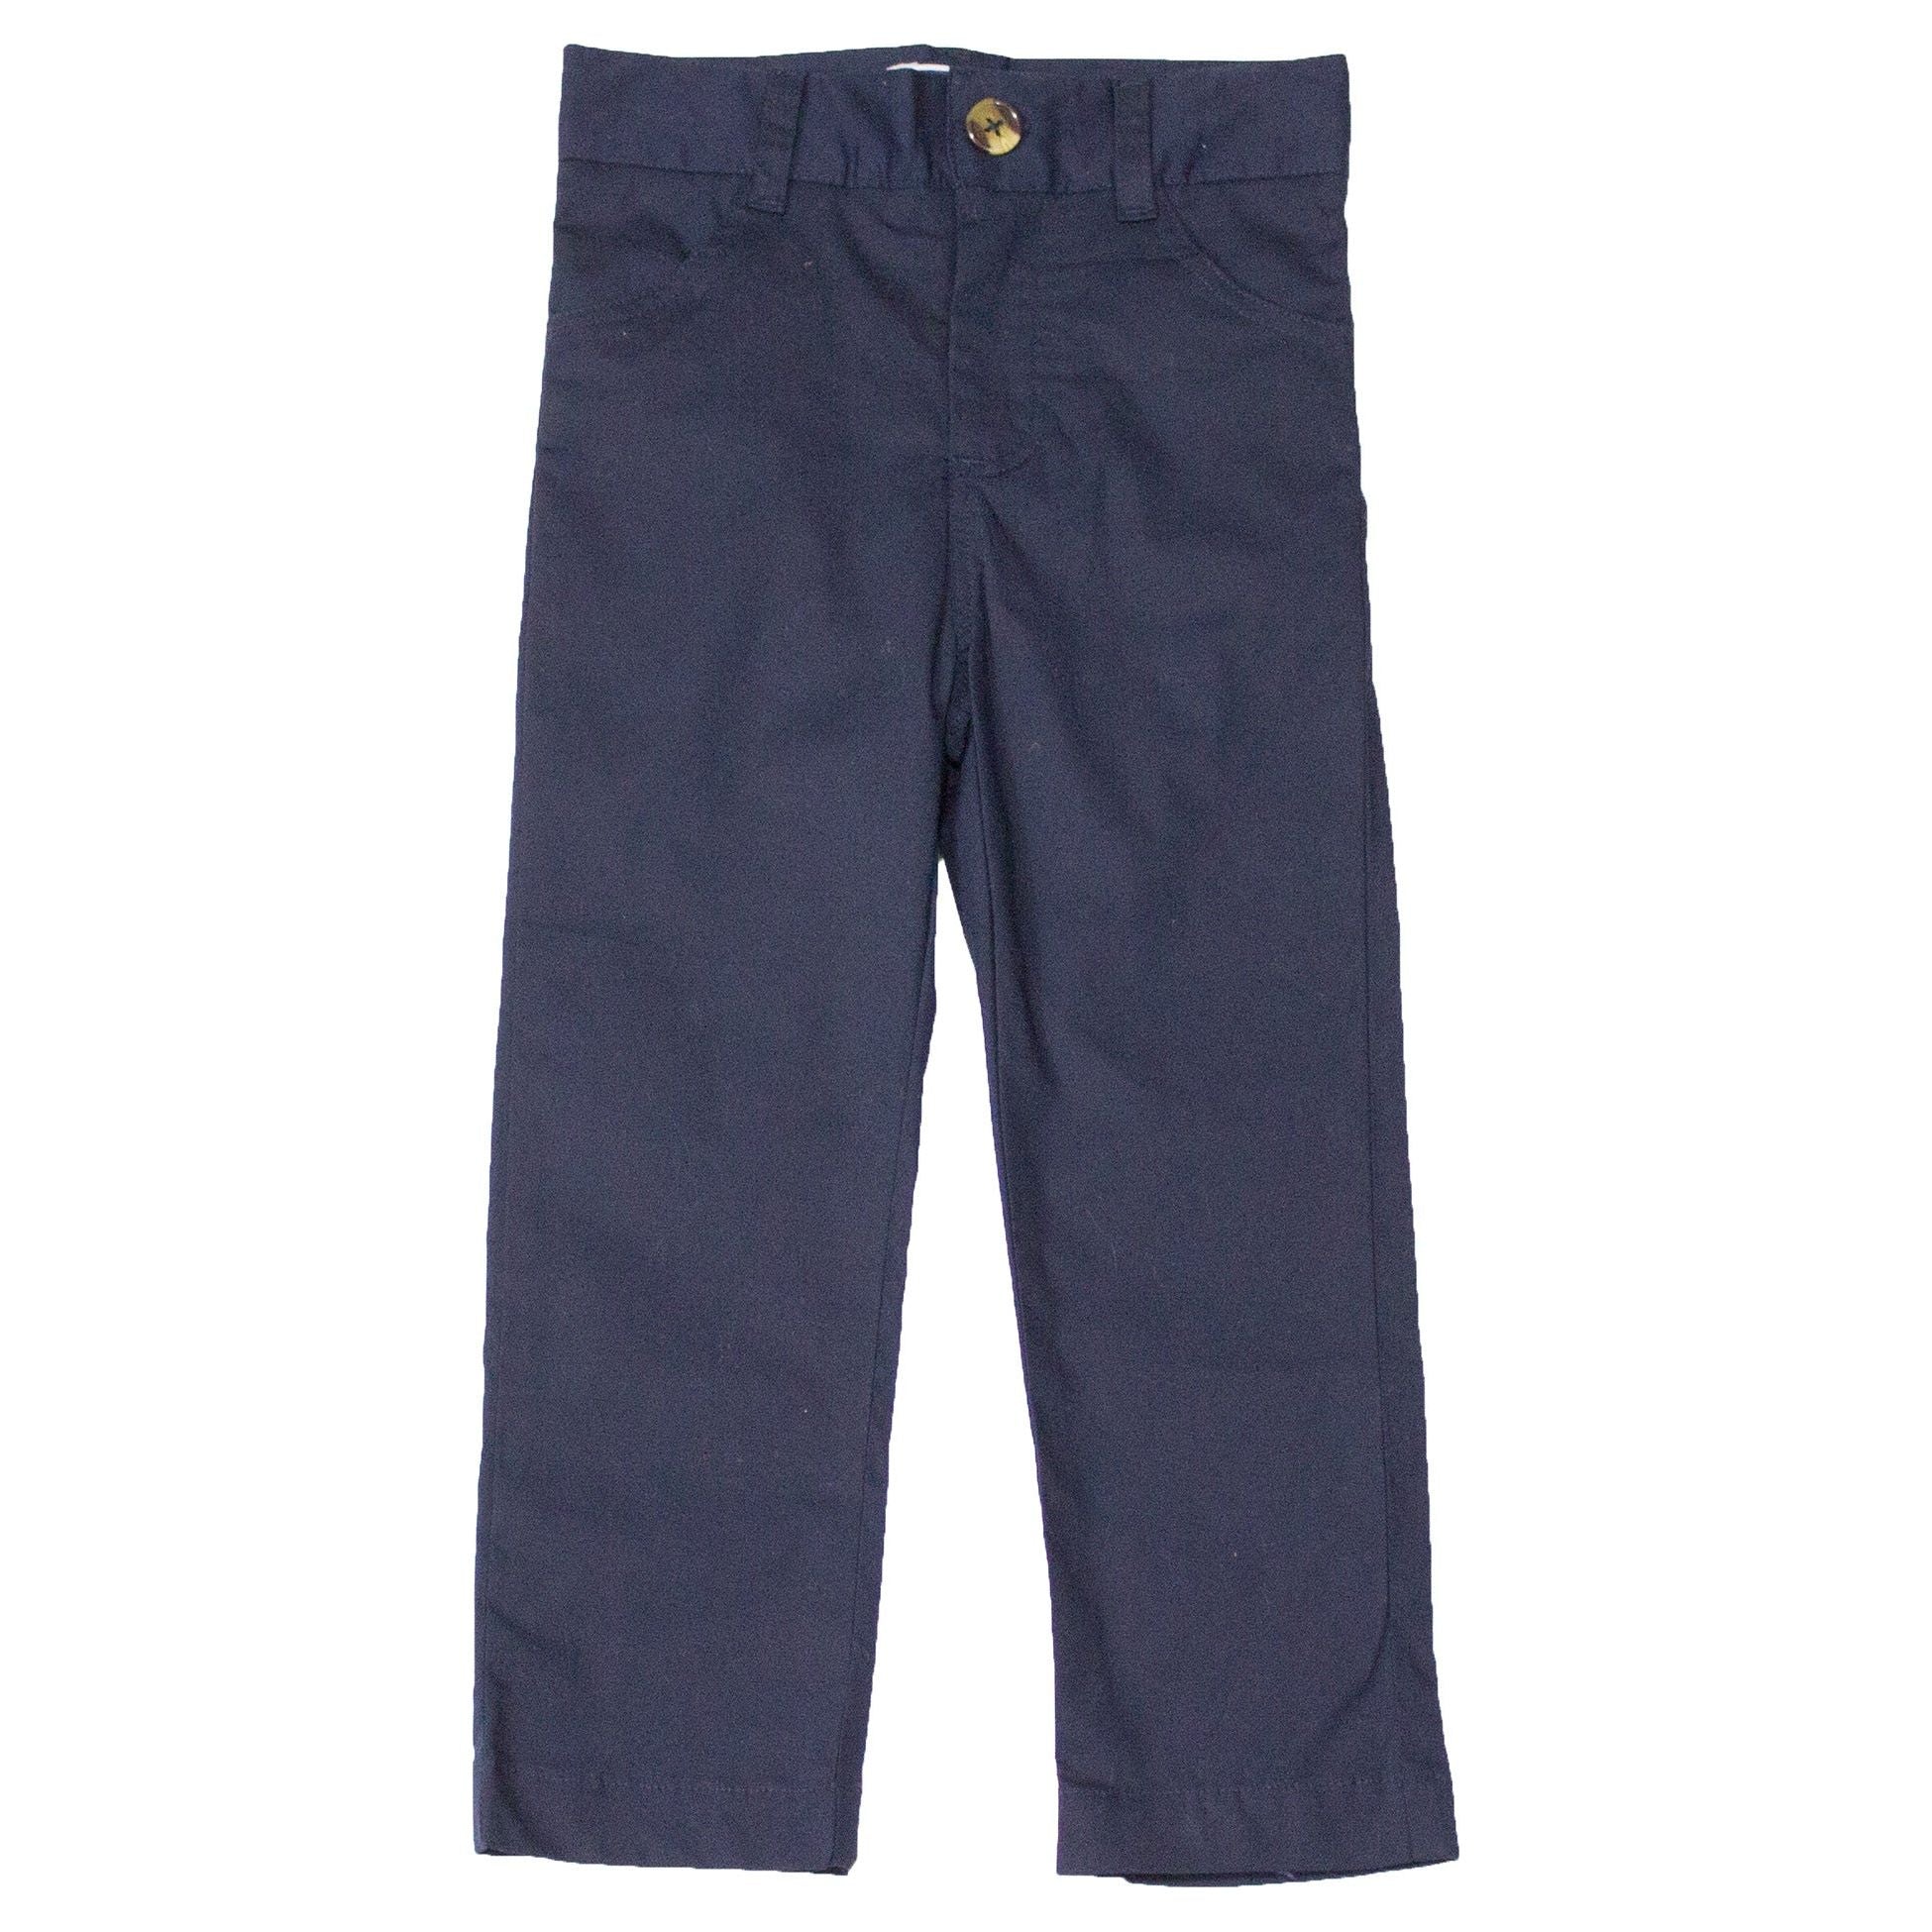 navy dress pants with button closure